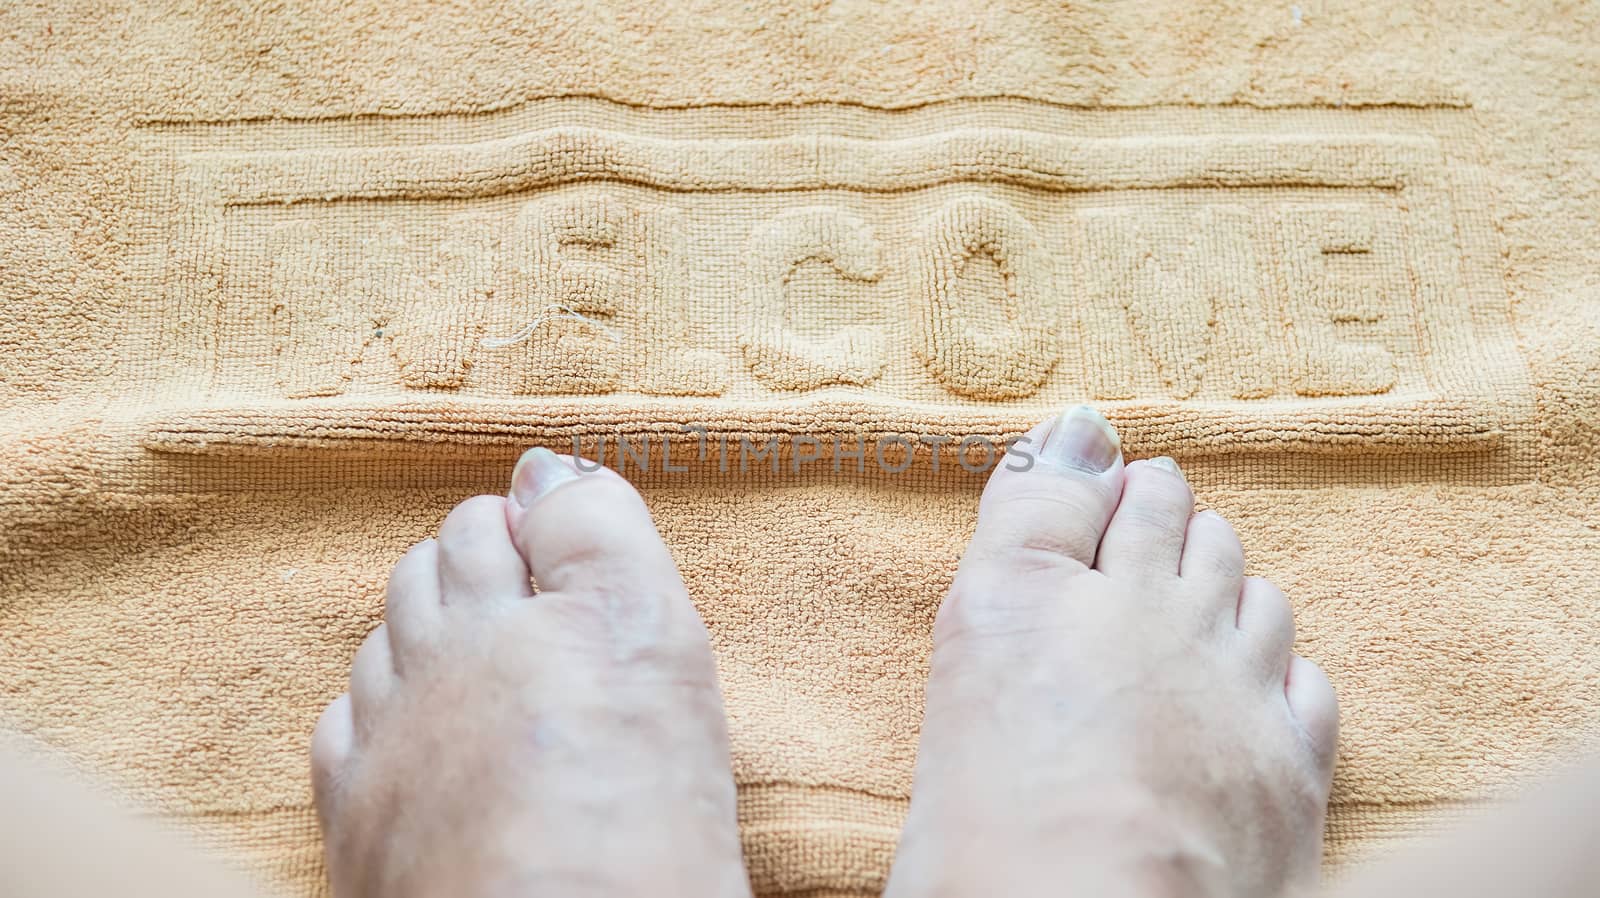 Foot towel with welcome sign on the bathroom floor by Bubbers